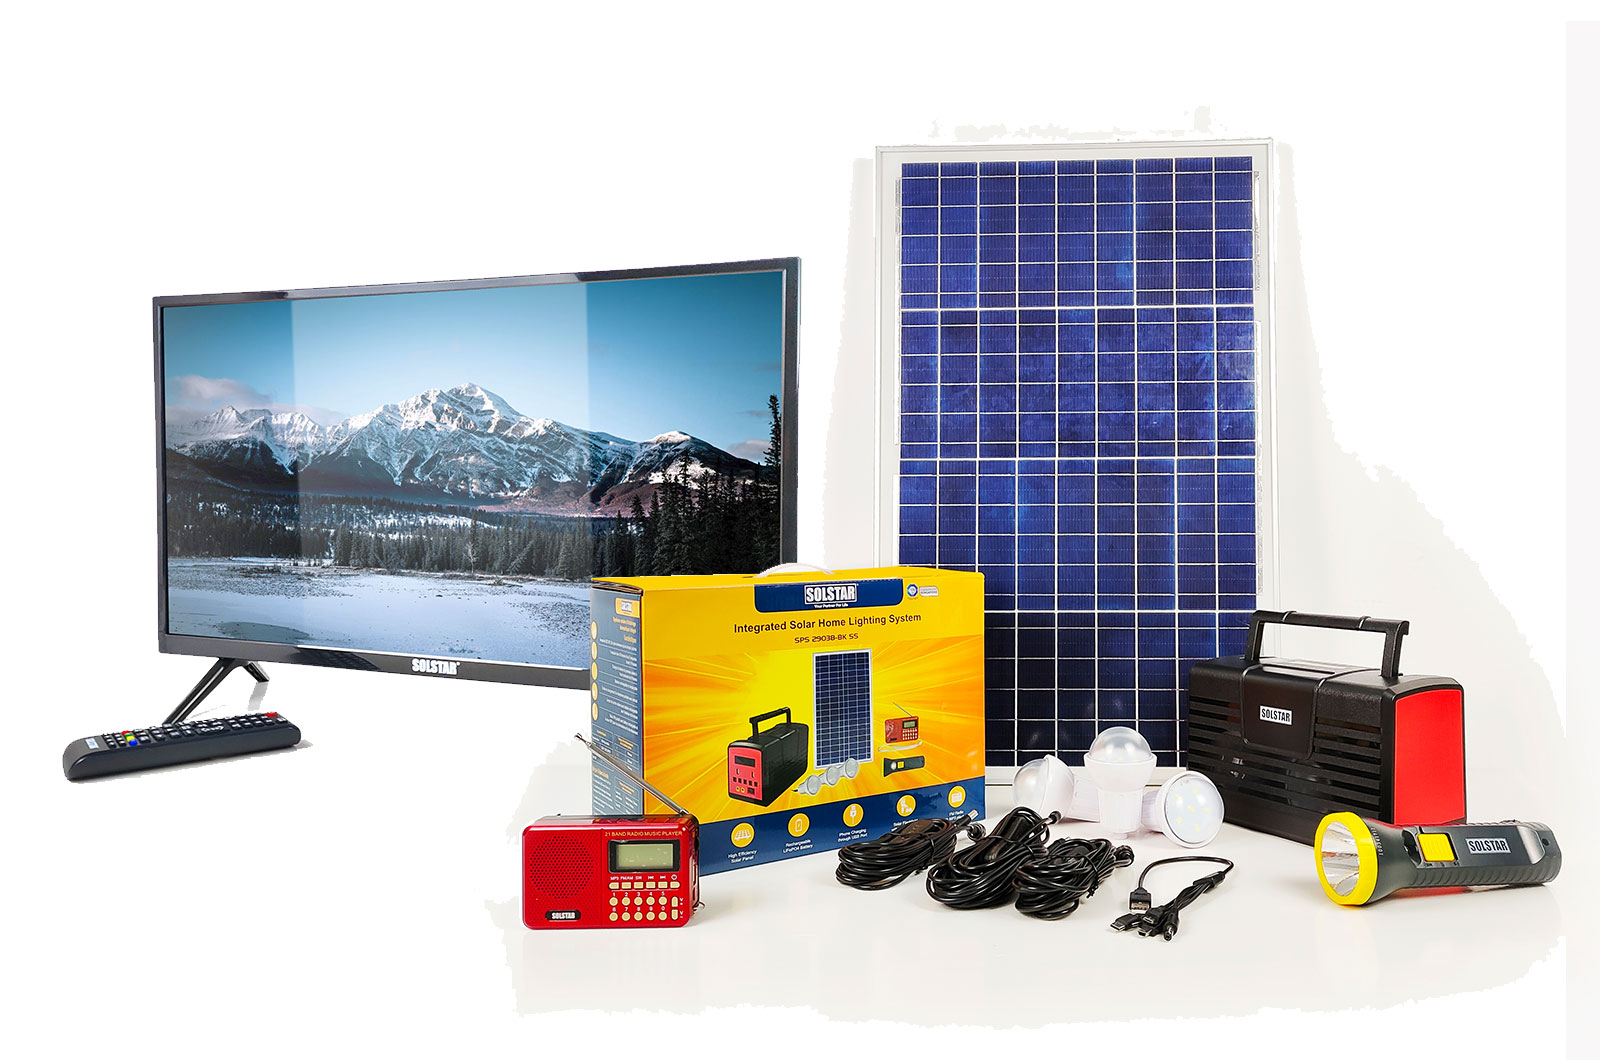 https://opalnet.shop/pub/media/Product_Files/Integrated-Solar-Home-Lighting-System-with-TV.jpg